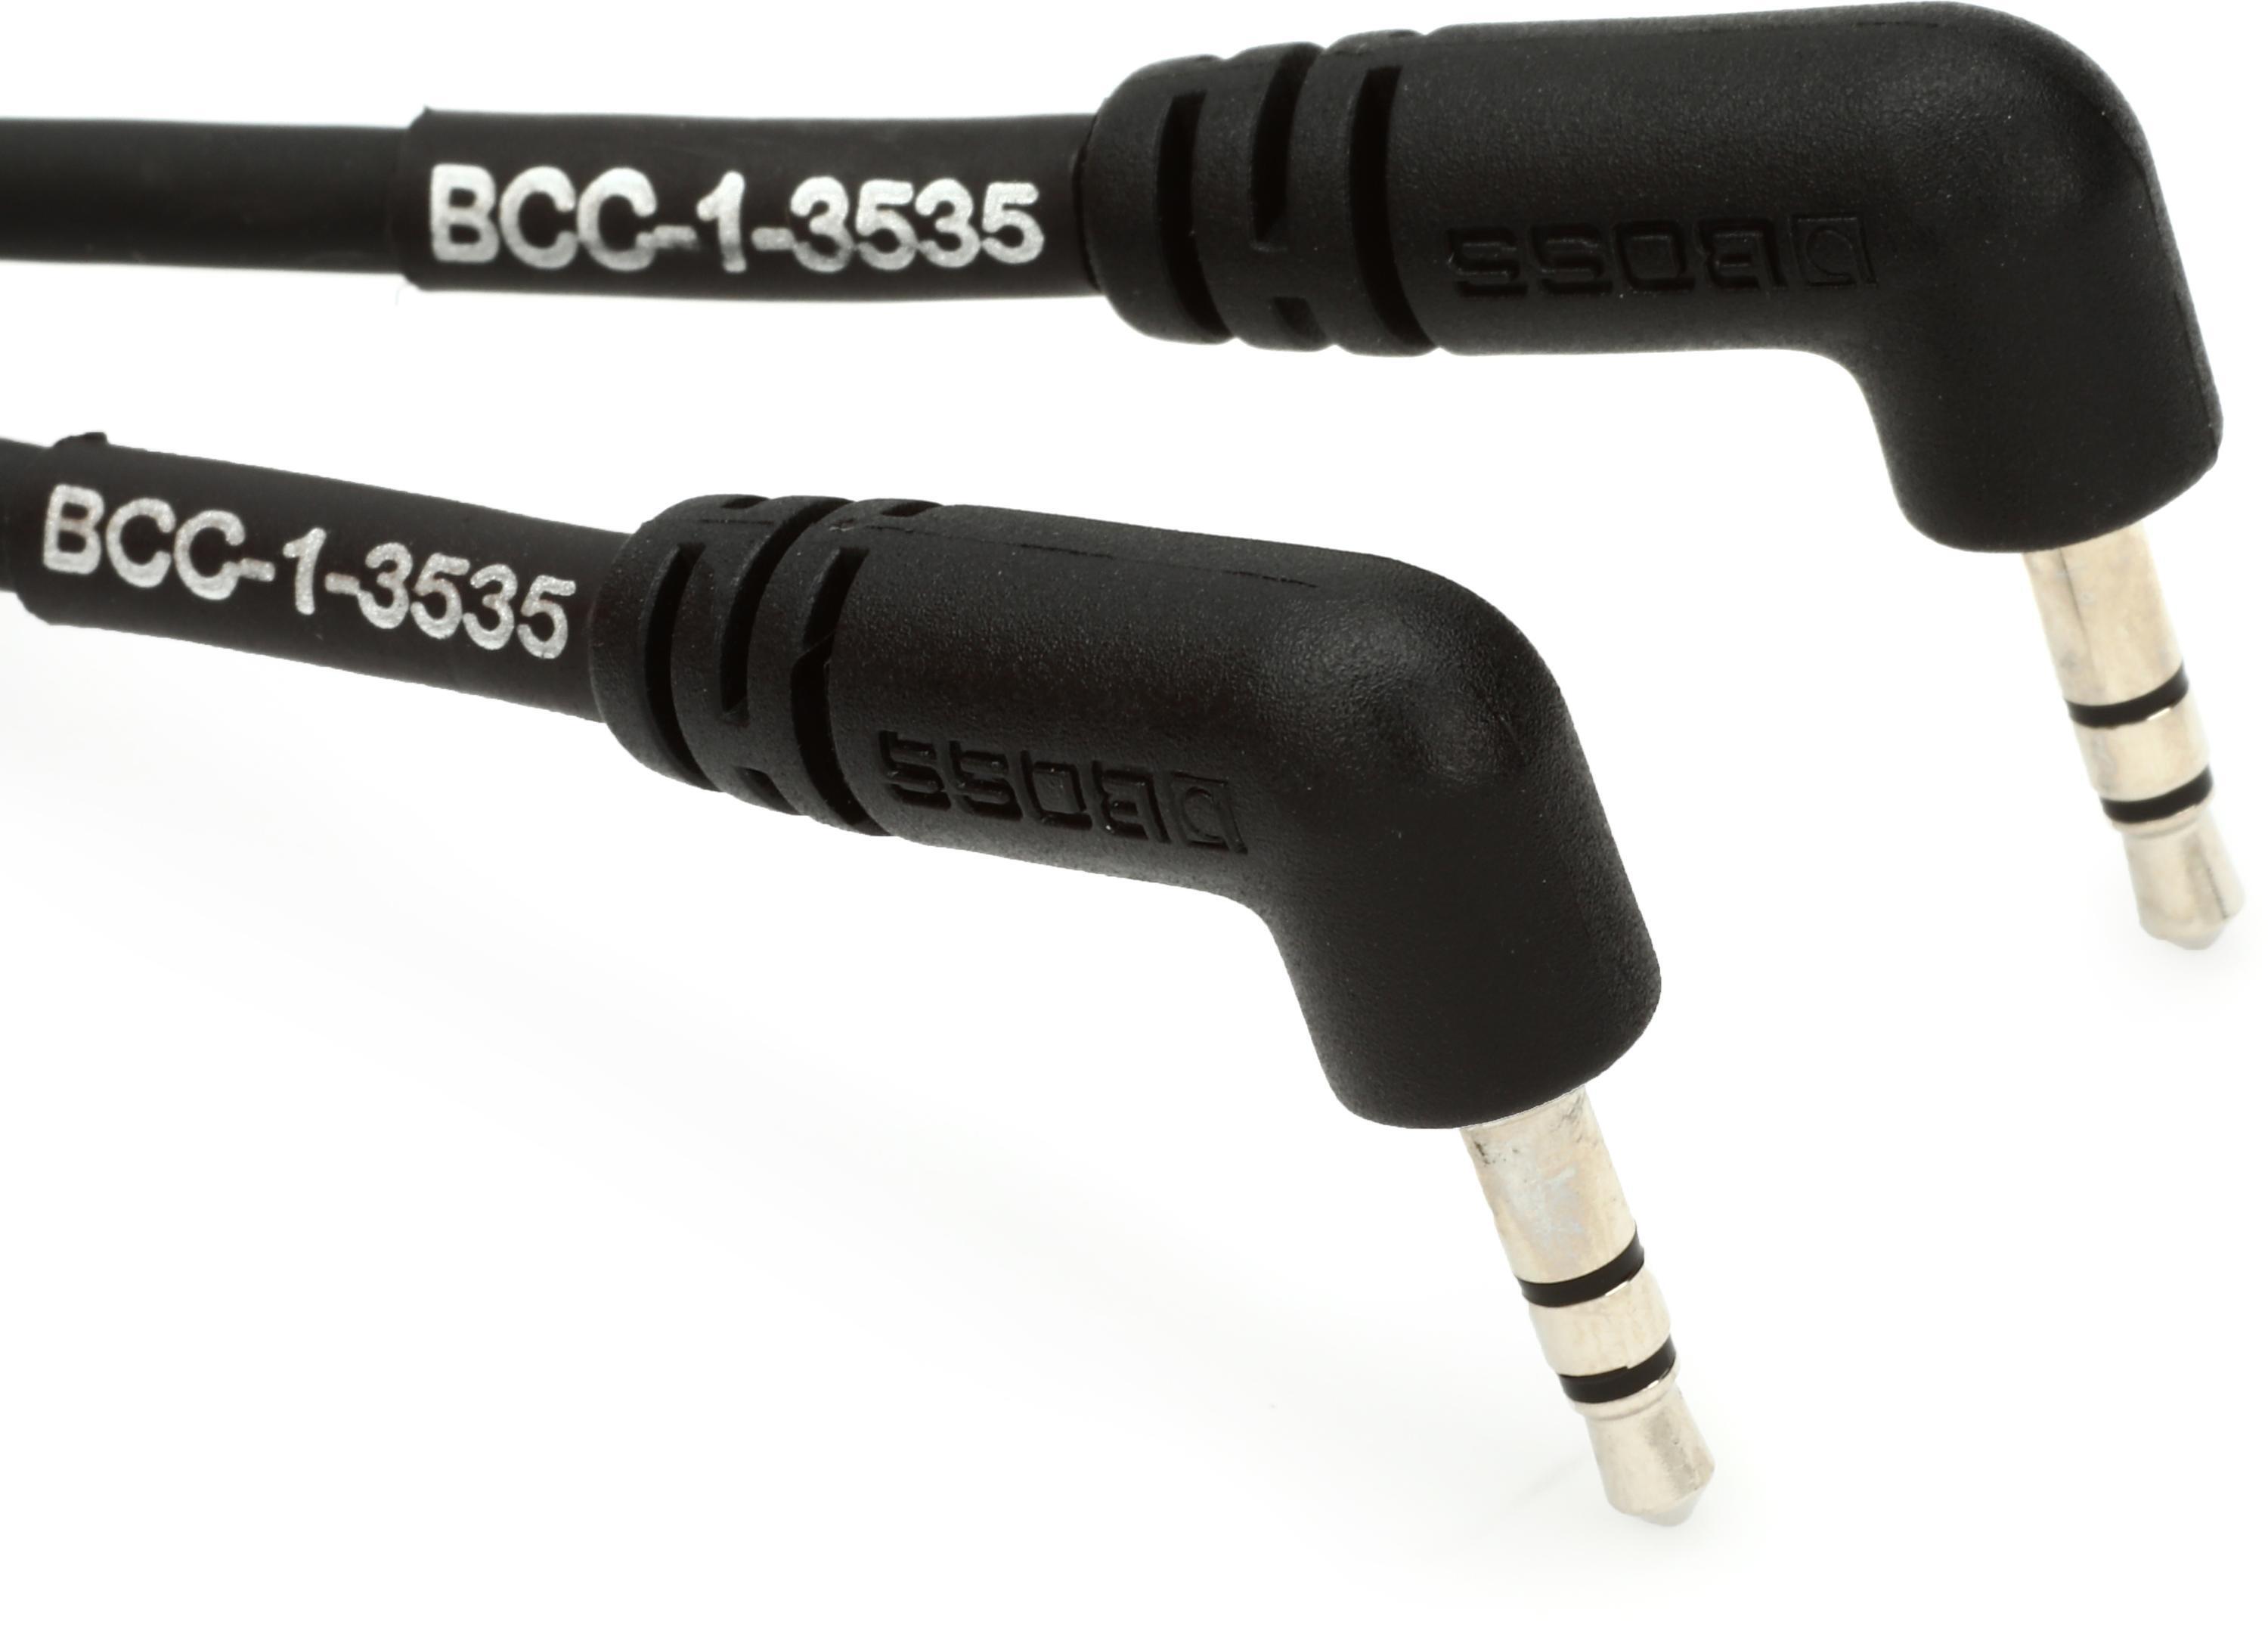 Boss BCC-1-3535 3.5mm TRS Type A MIDI Cable - 1 foot